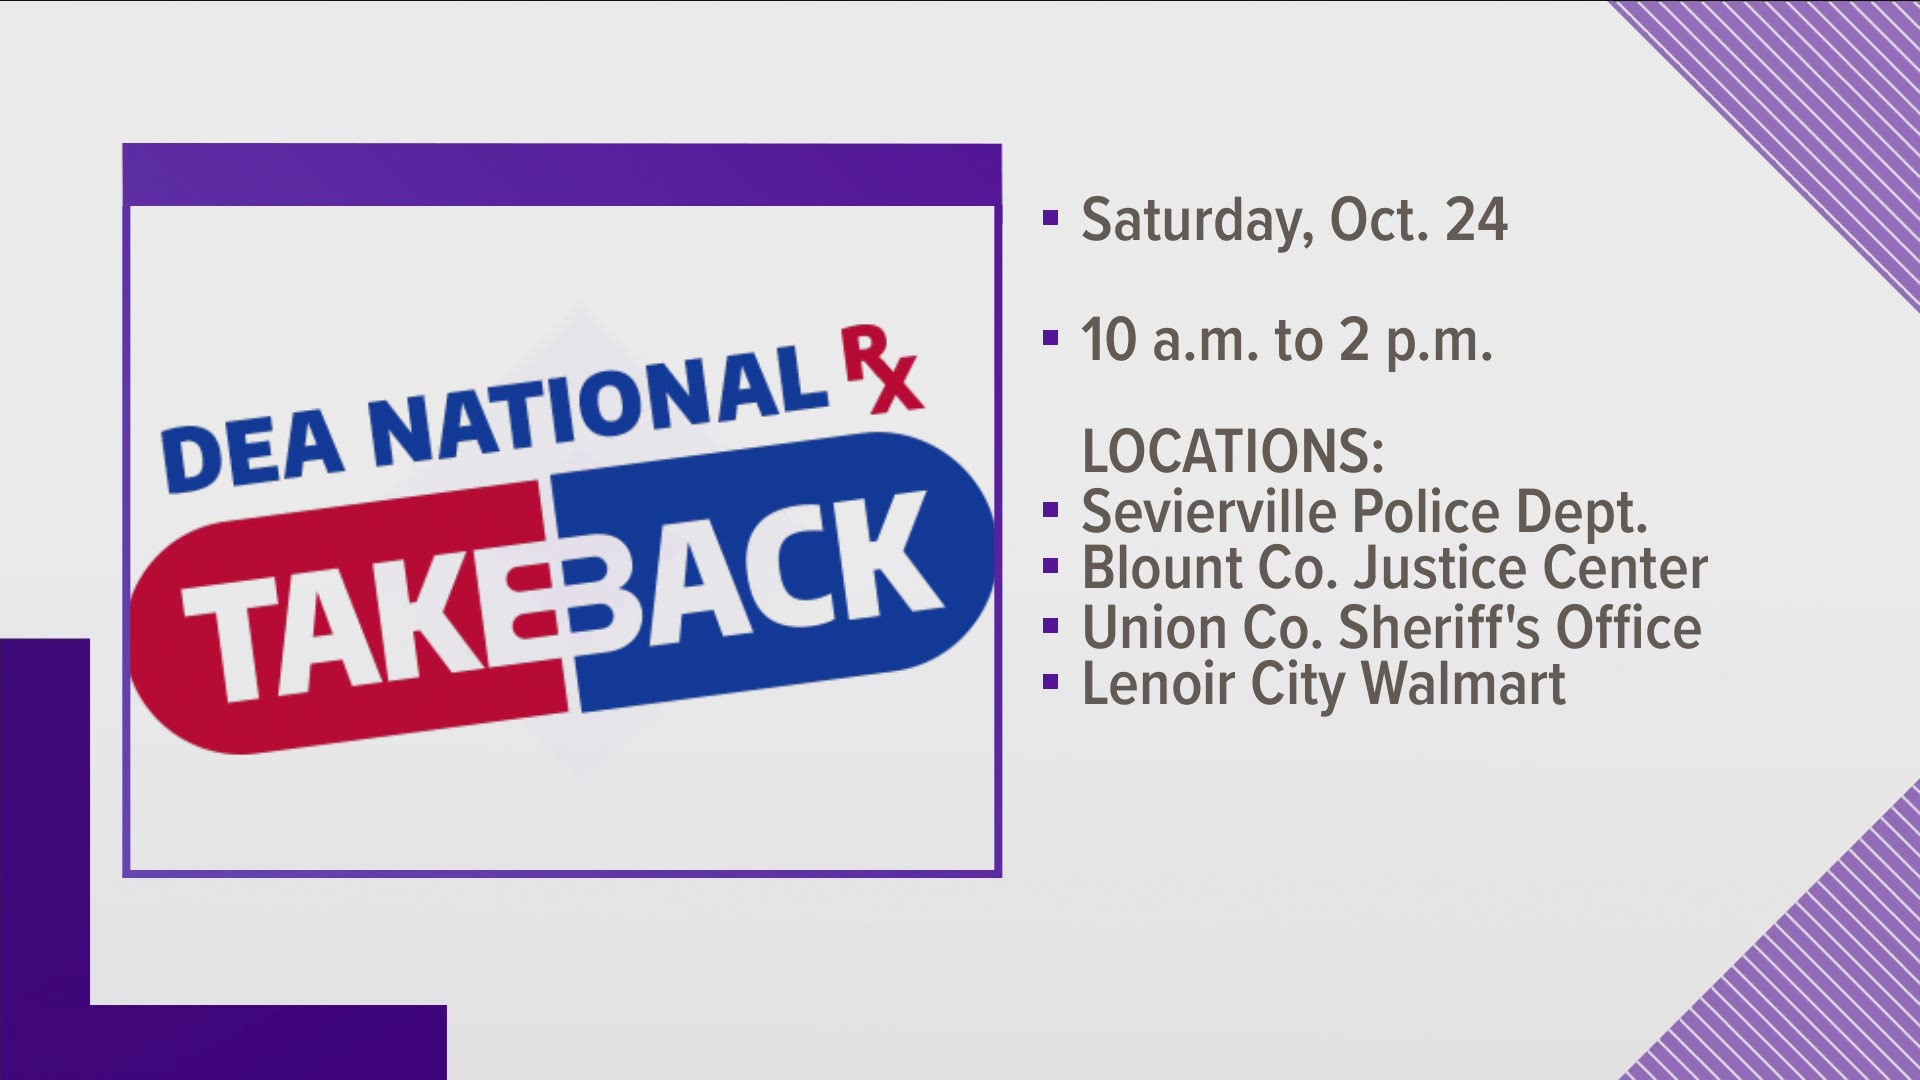 Some spots include the Sevierville Police Department, Blount County Justice Center, Union County Sheriff's Office and the Walmart in Lenoir City.